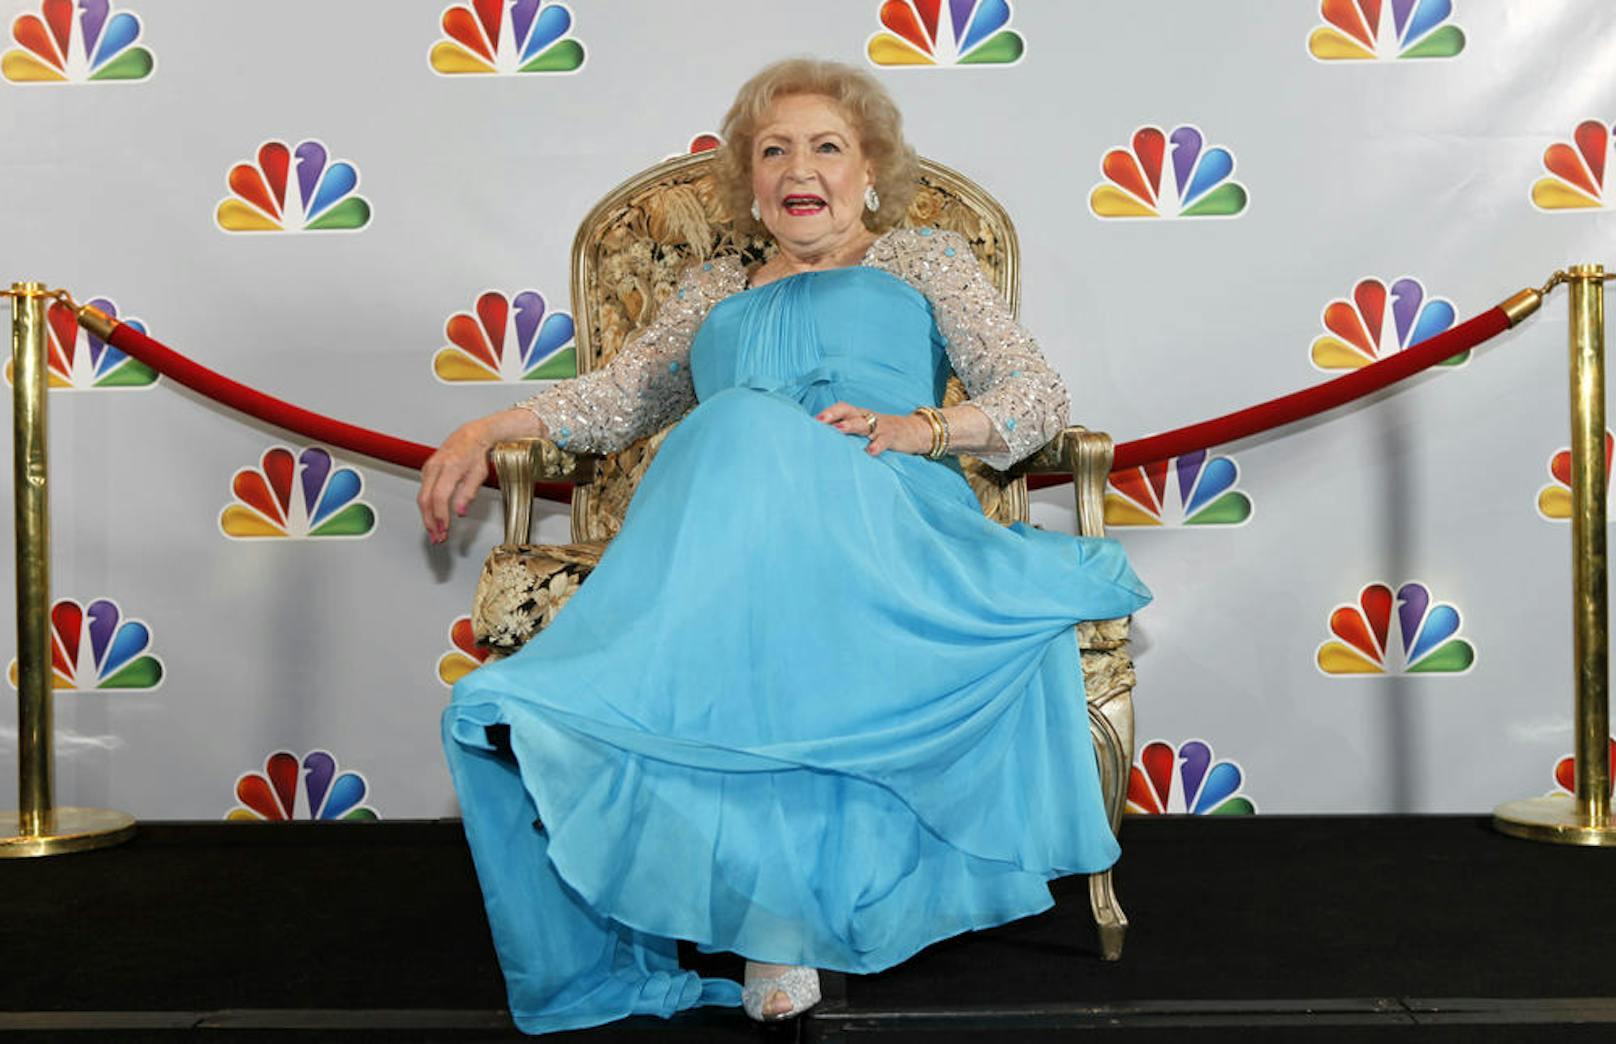 Betty White bei "Betty White's 90th Birthday: A Tribute to America's Golden Girl" in Los Angeles, 2012.